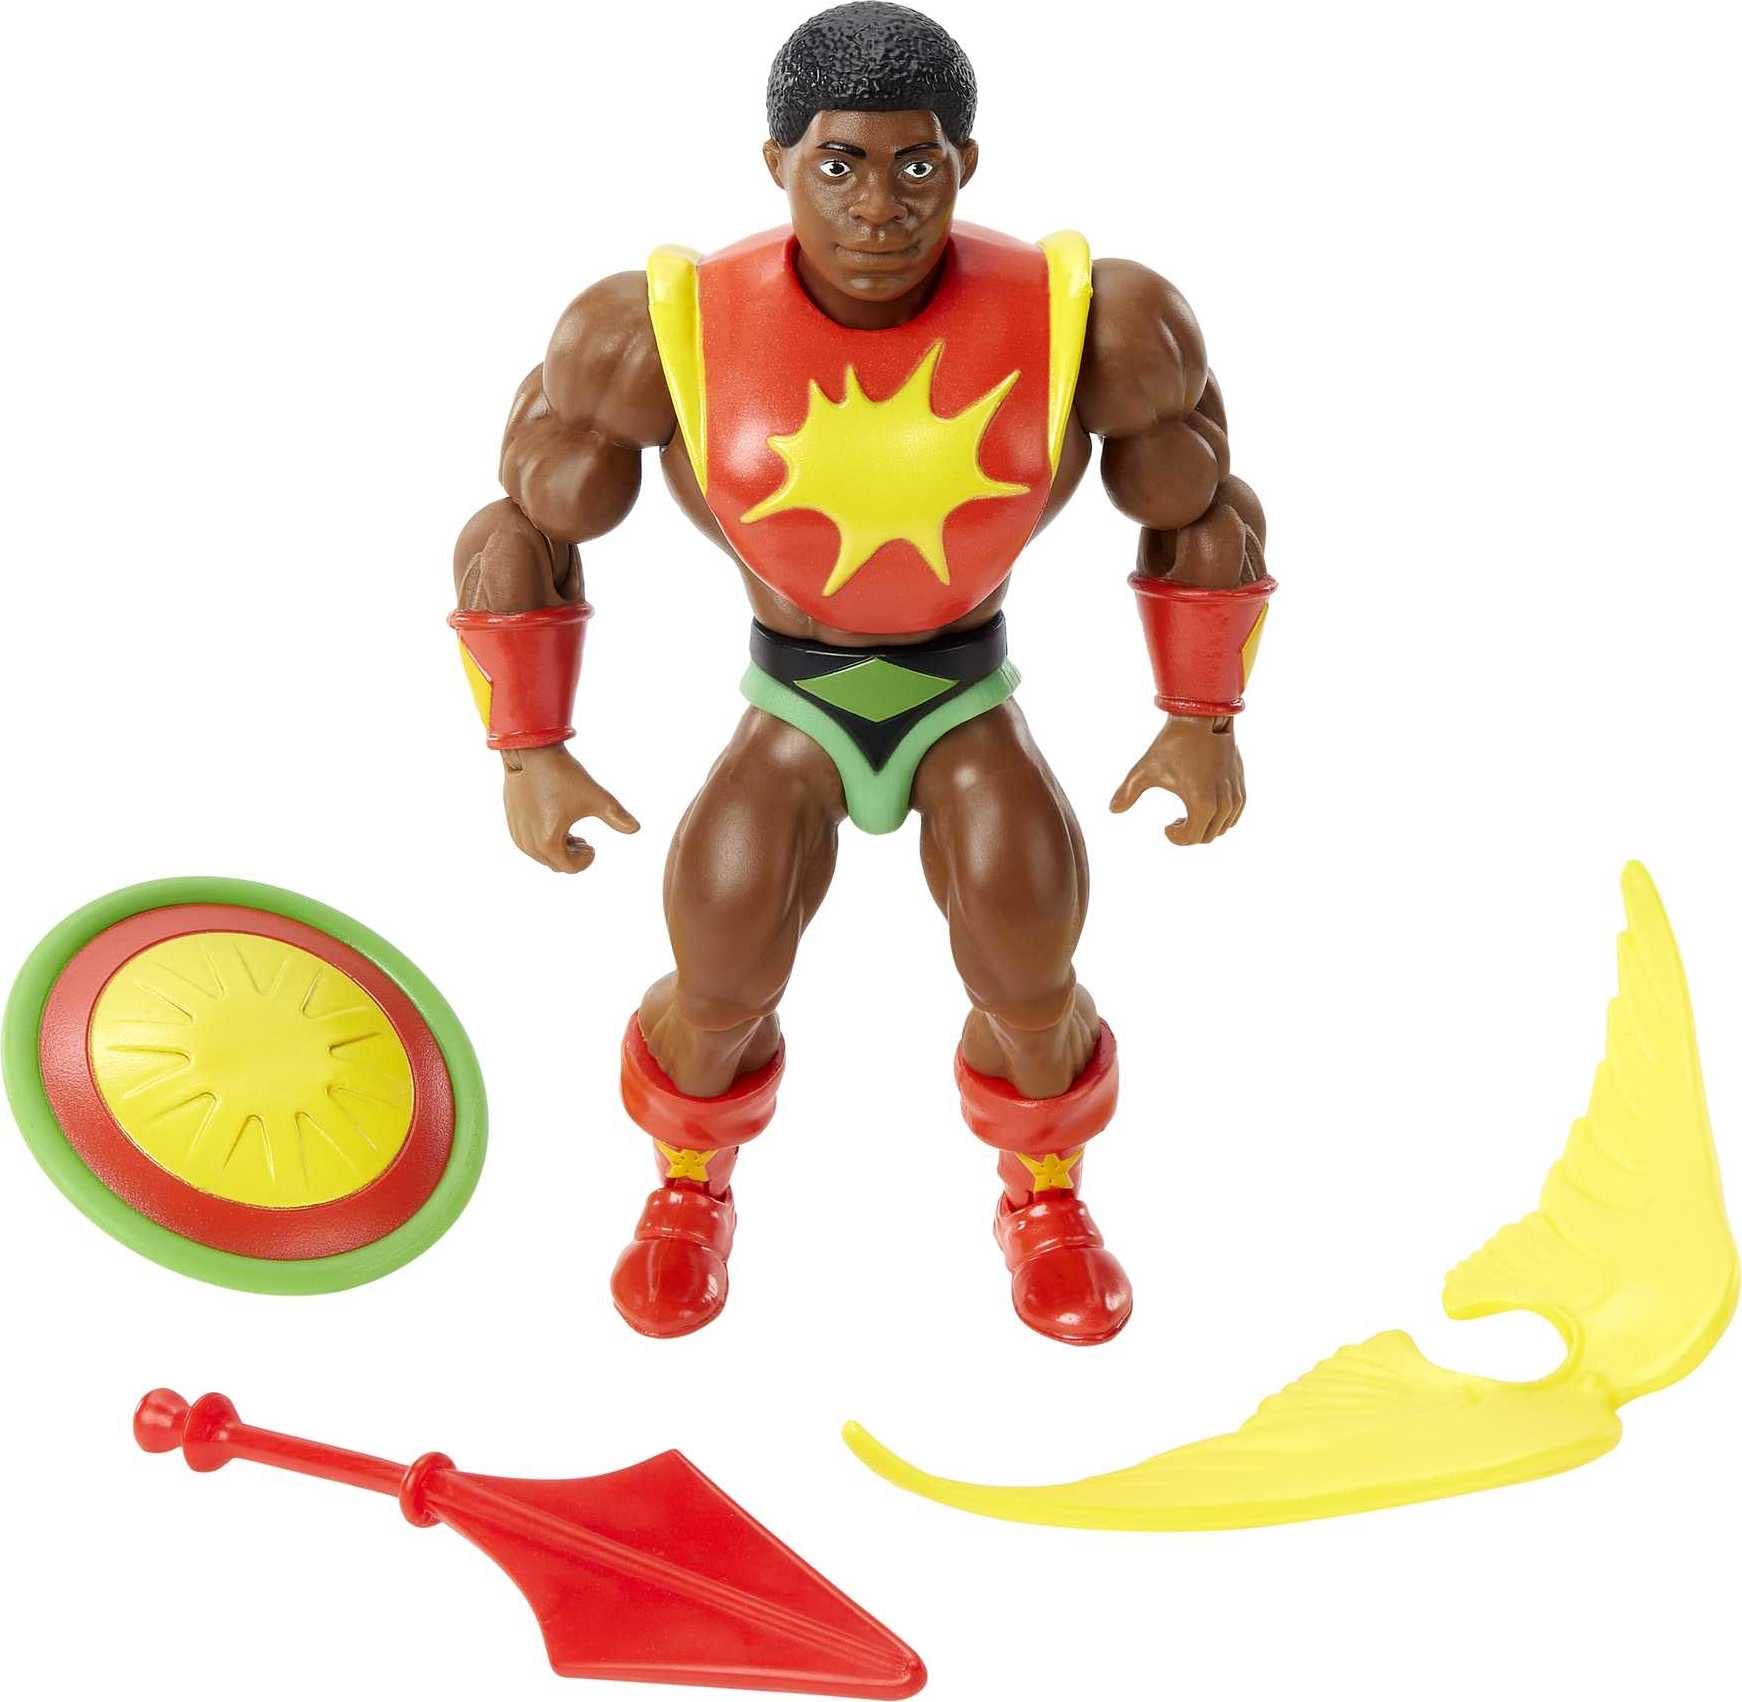 5.5'' He-Man & The Masters of the Universe Origins Toy: Sun-Man Action Figure w/ Accessories $6.61 + Free Shipping w/ Prime or on $35+